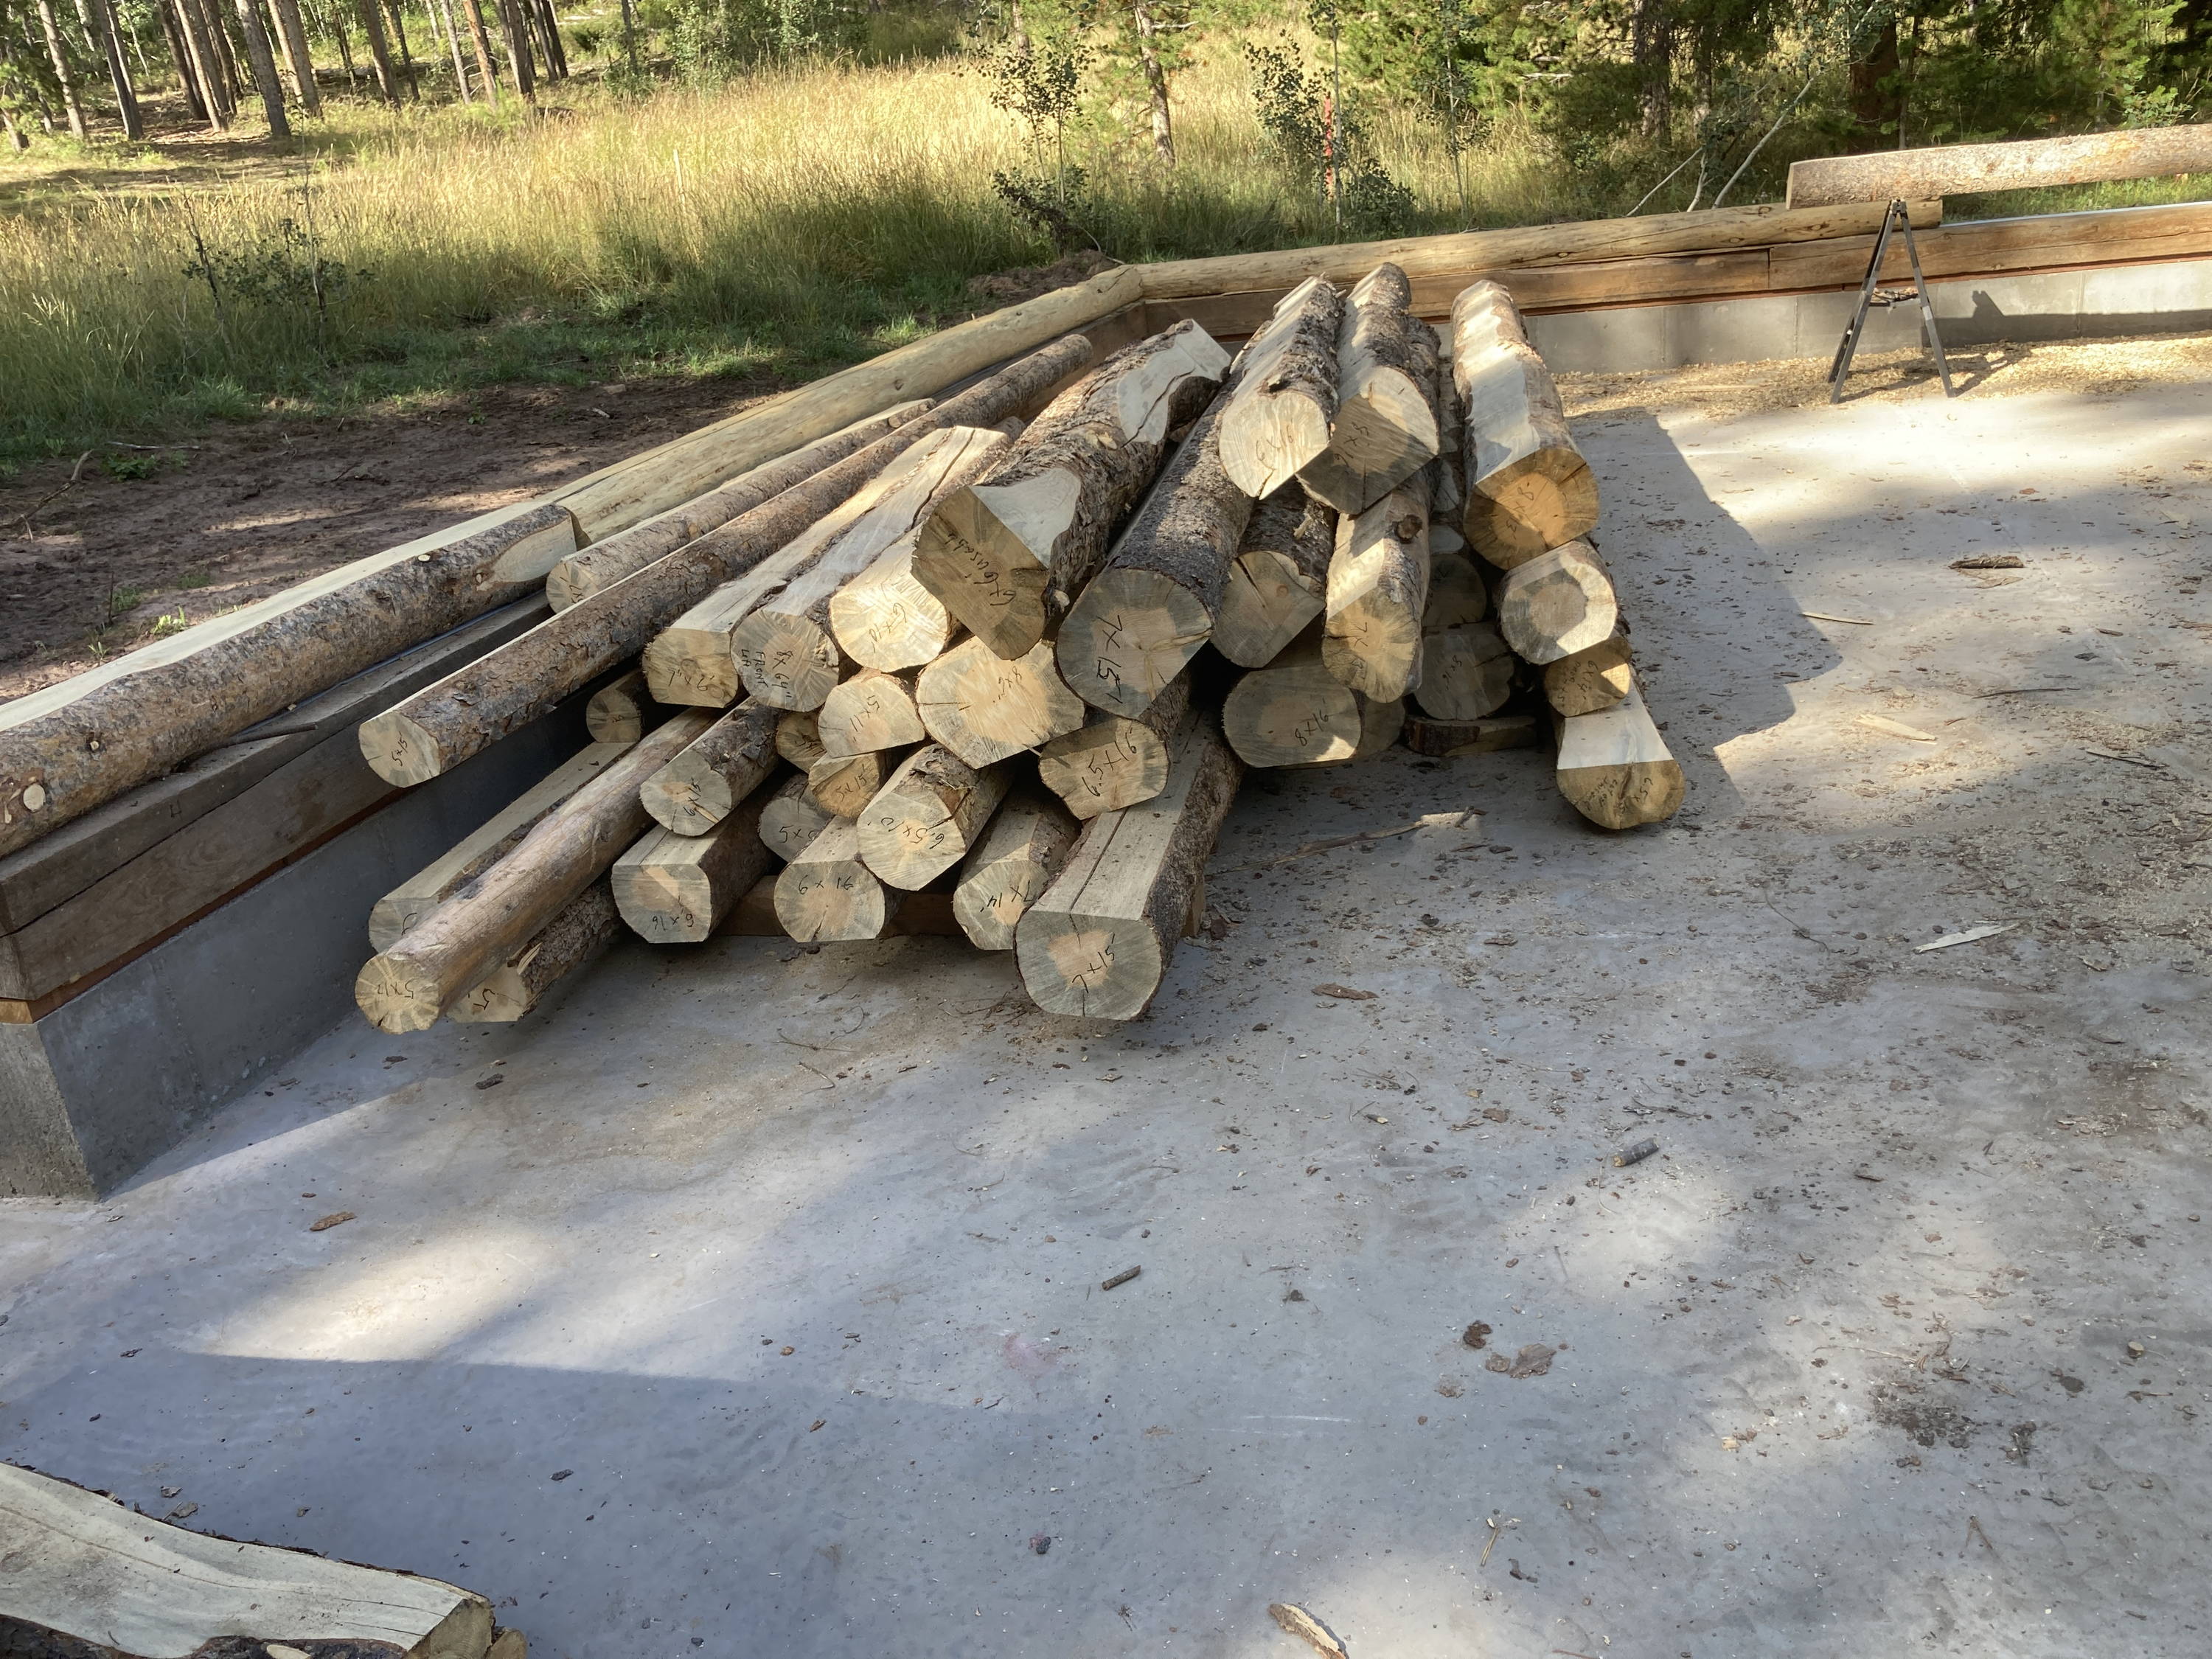 A pile of treated logs ready to be assembled